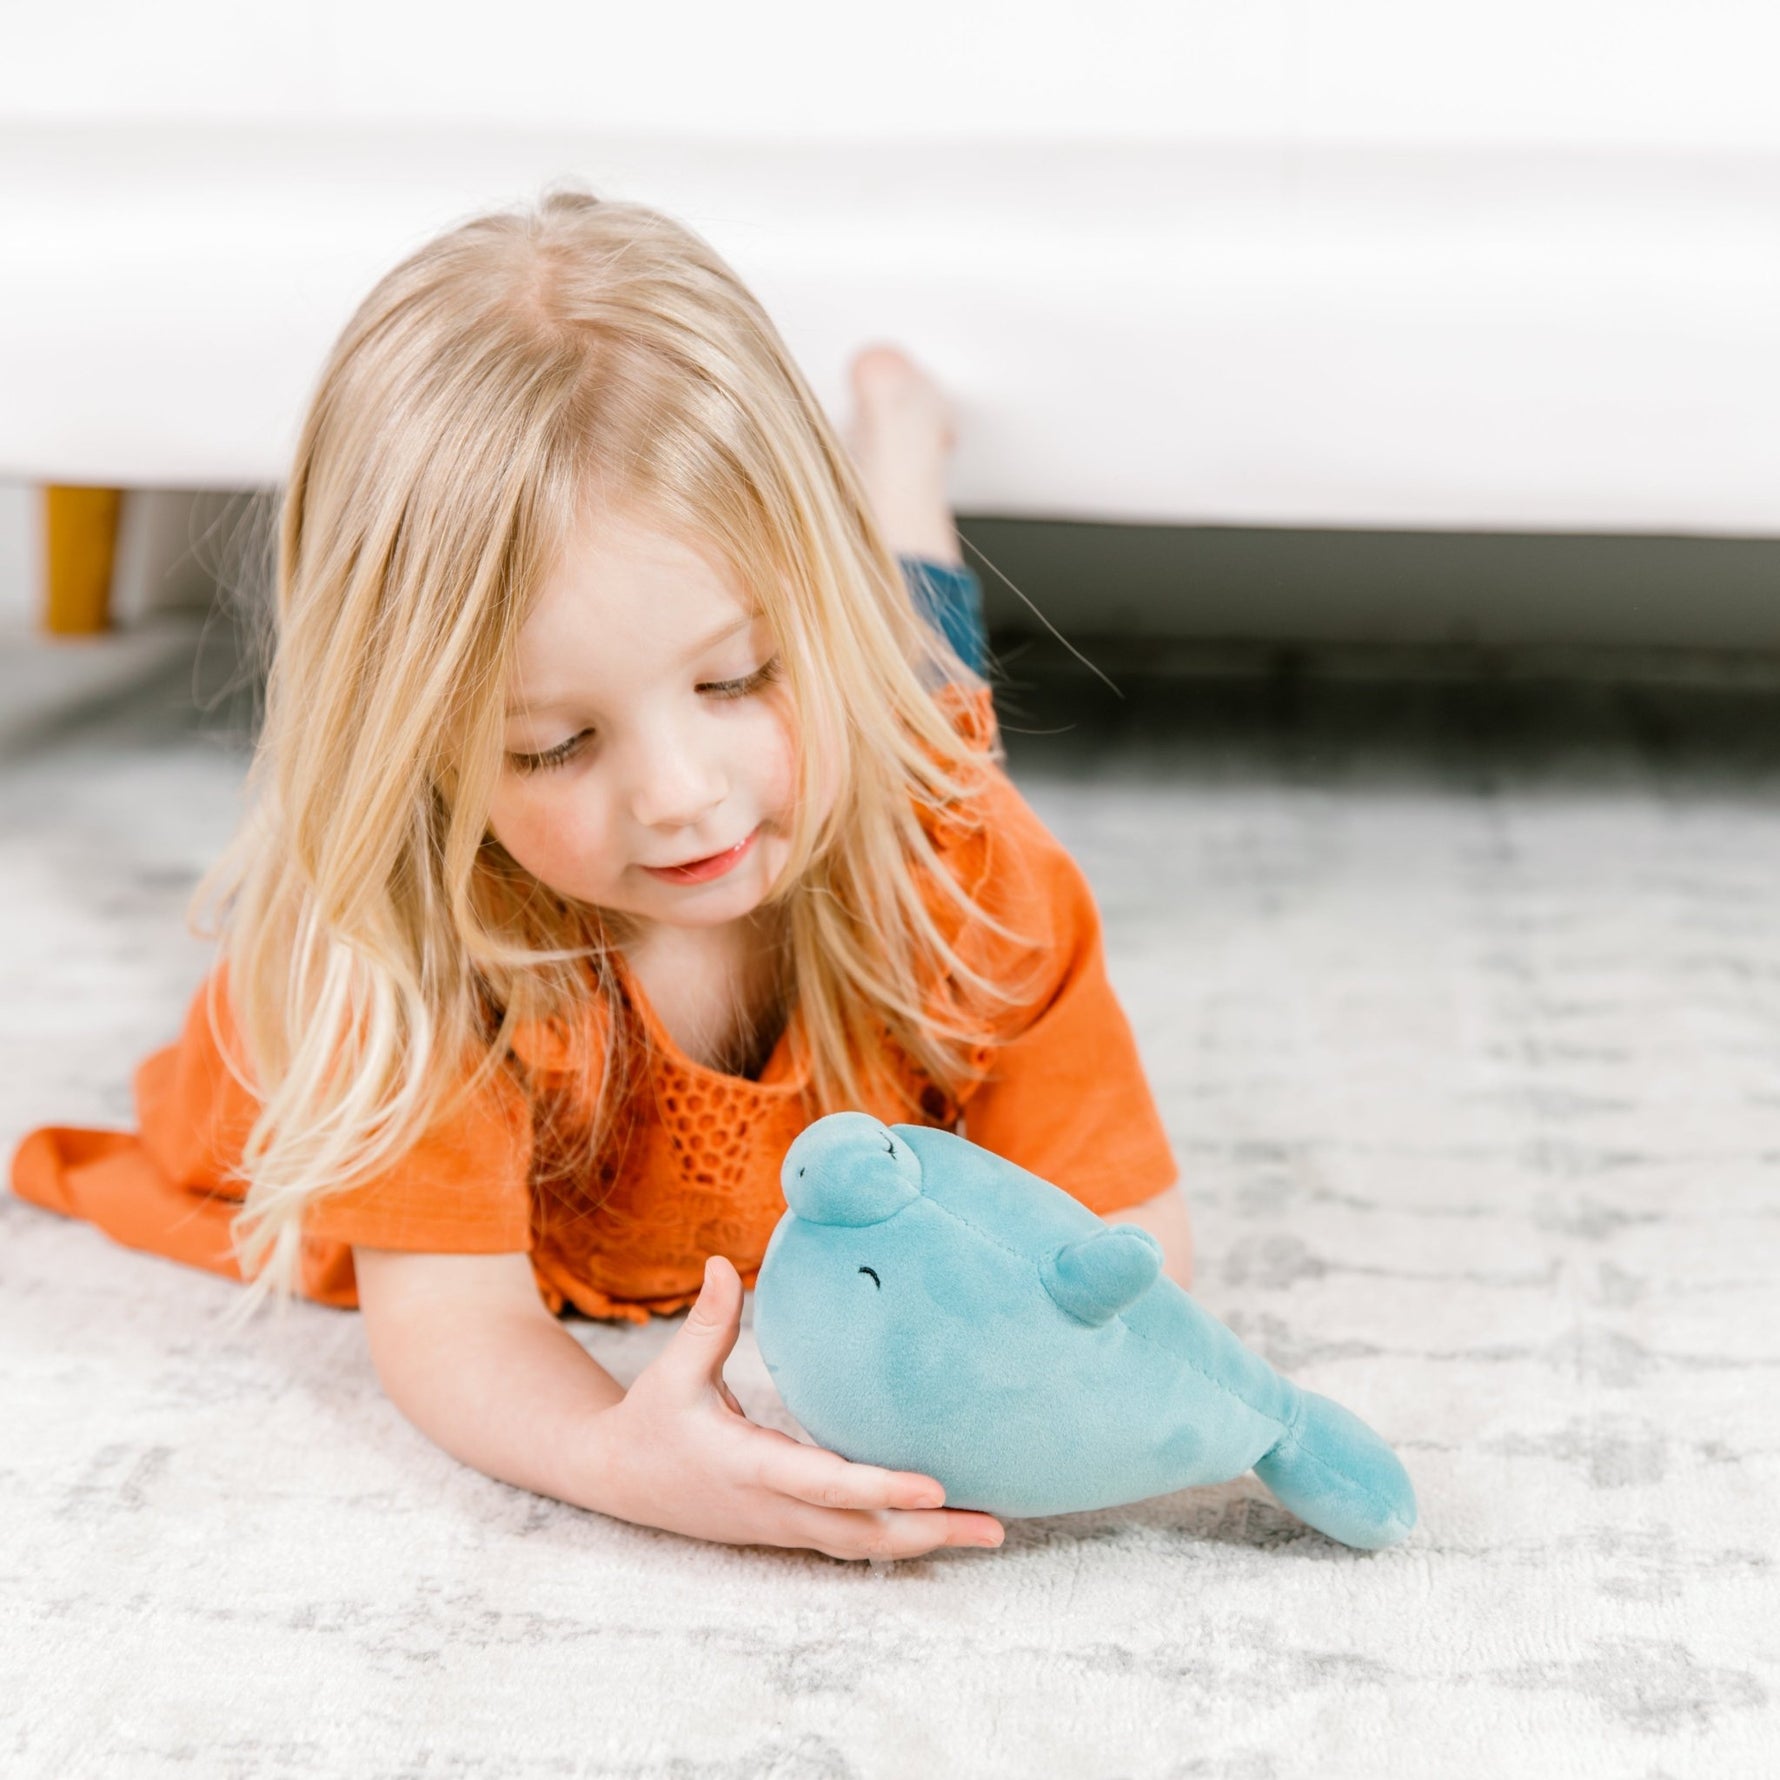 8 Factors To Consider When Buying Plush Toys For Babies - Snuggie Buggies